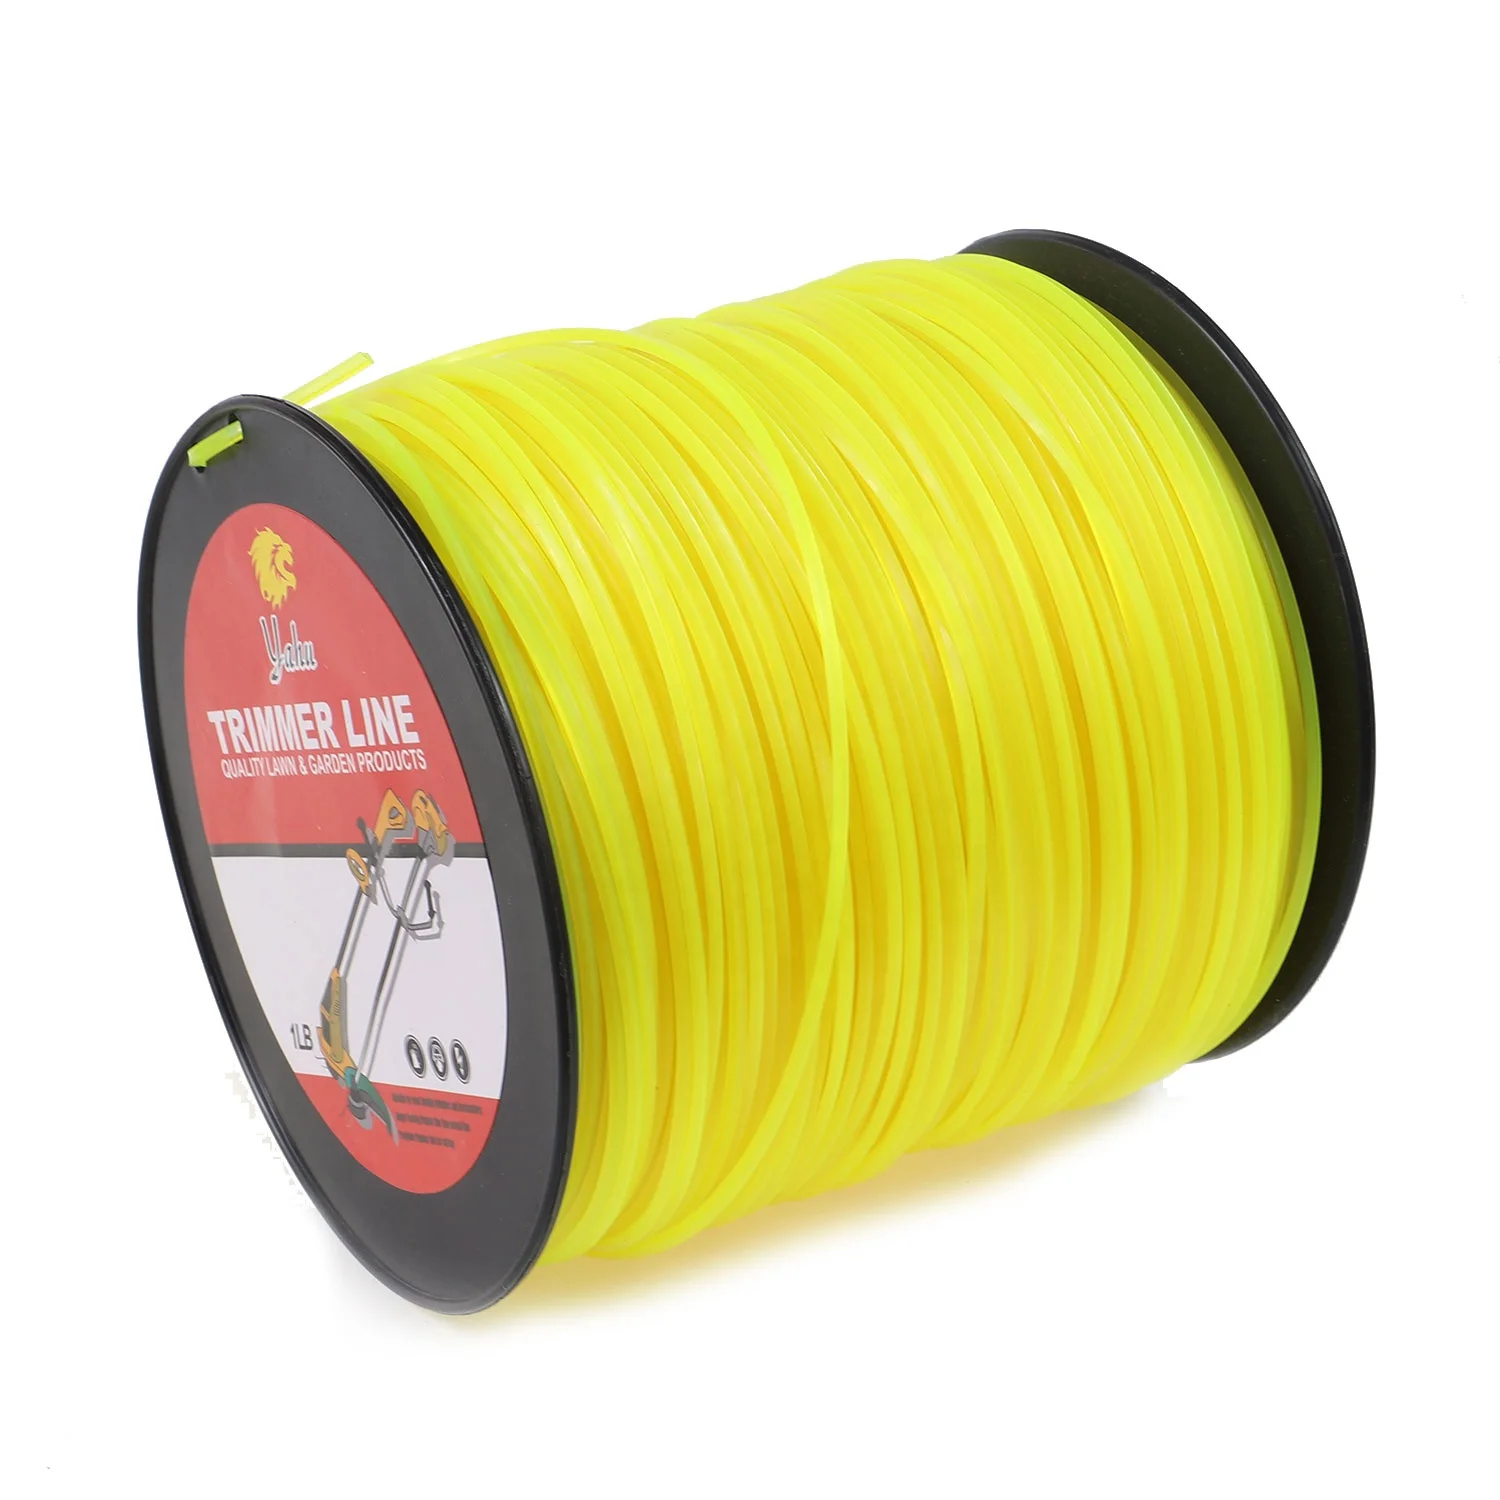 Details about   STRIMMER LINE VARIOUS SIZE  ROLLS ELECTRIC 1.25mm-2.4mm NYLON CORD GREEN JEM 